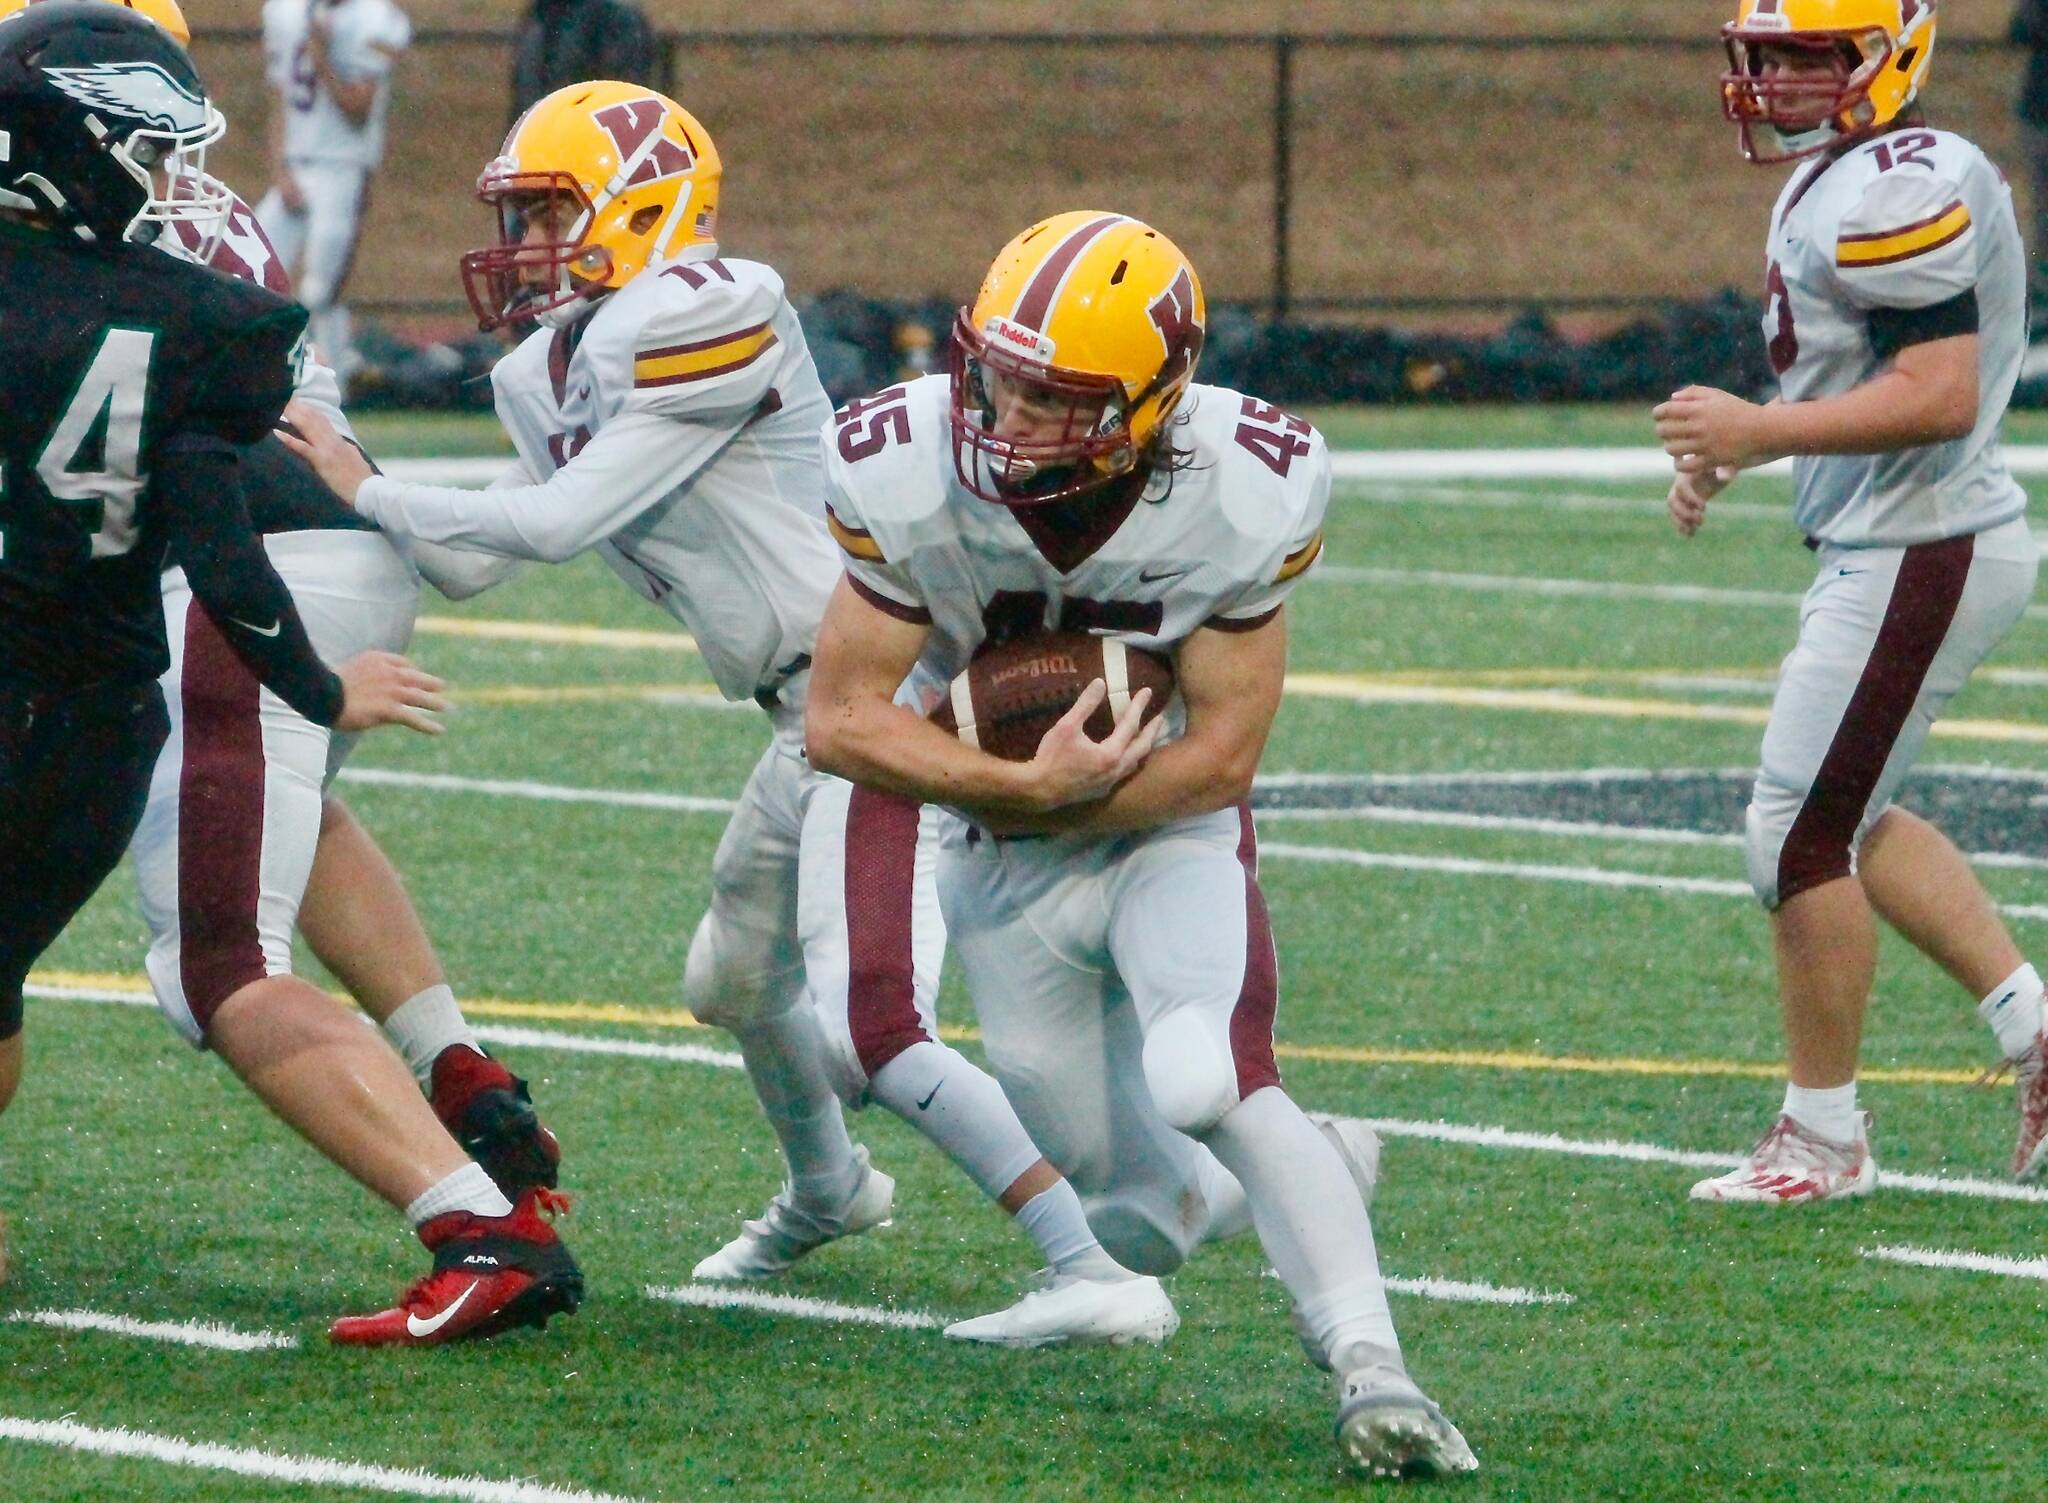 Kingston senior Sam Reber looks for running room against Klahowya. He finished the game with 76 yards and a touchdown for the Bucs. (Mark Krulish/North Kitsap Herald)